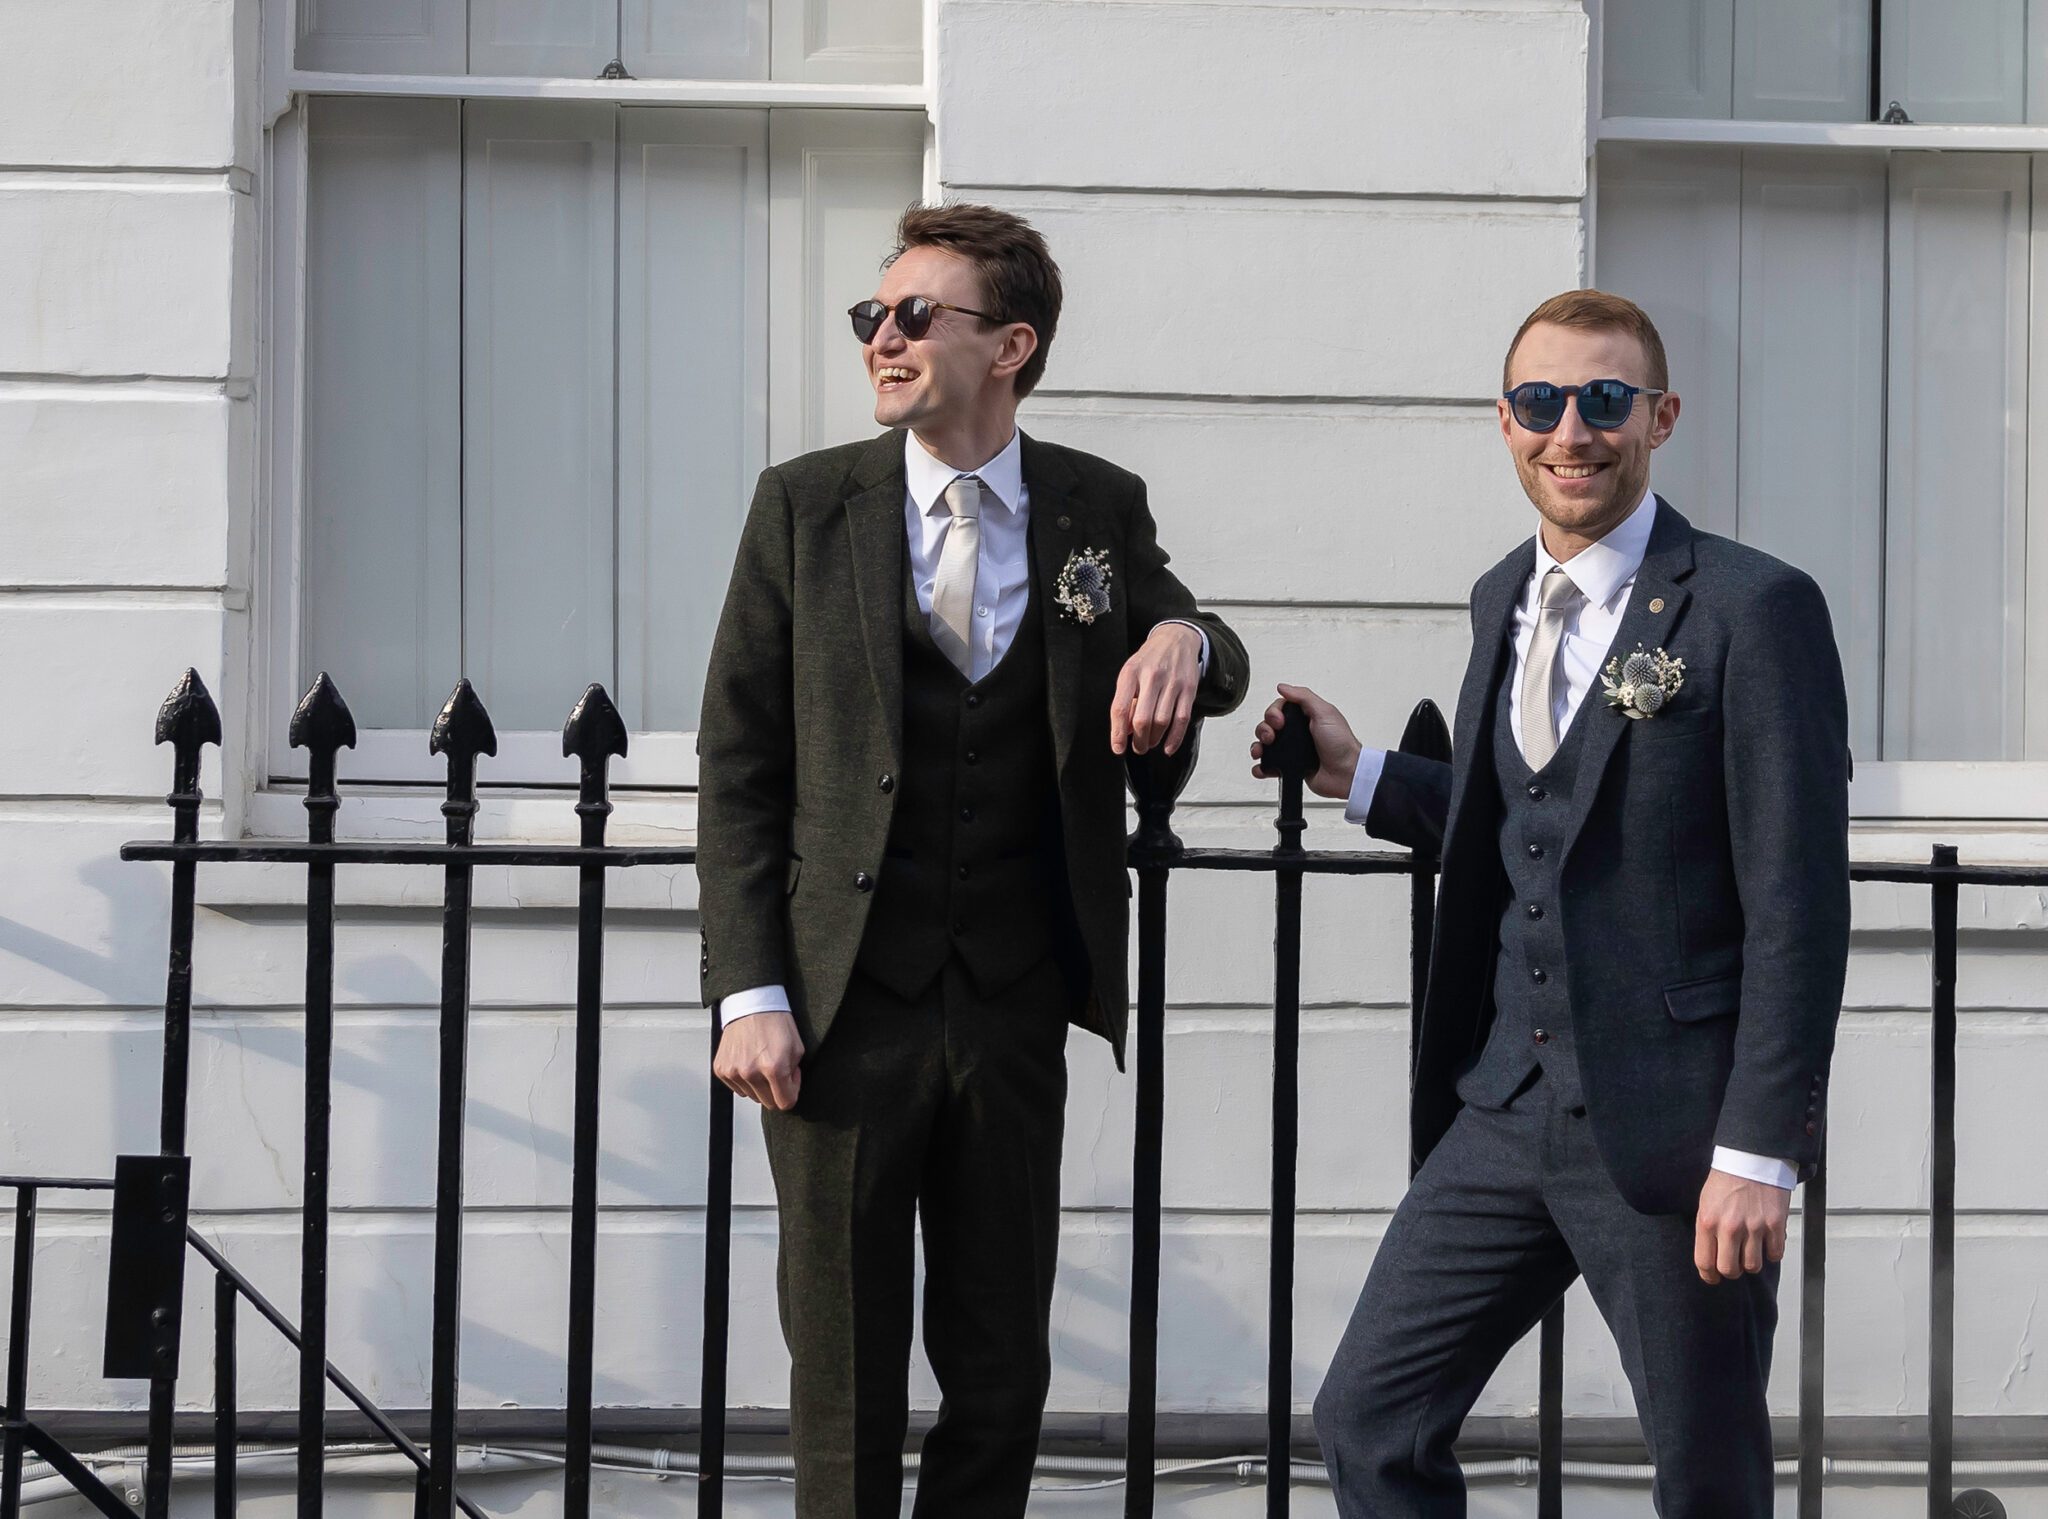 Two grooms with sunglasses Old Marylebone Town Hall wedding